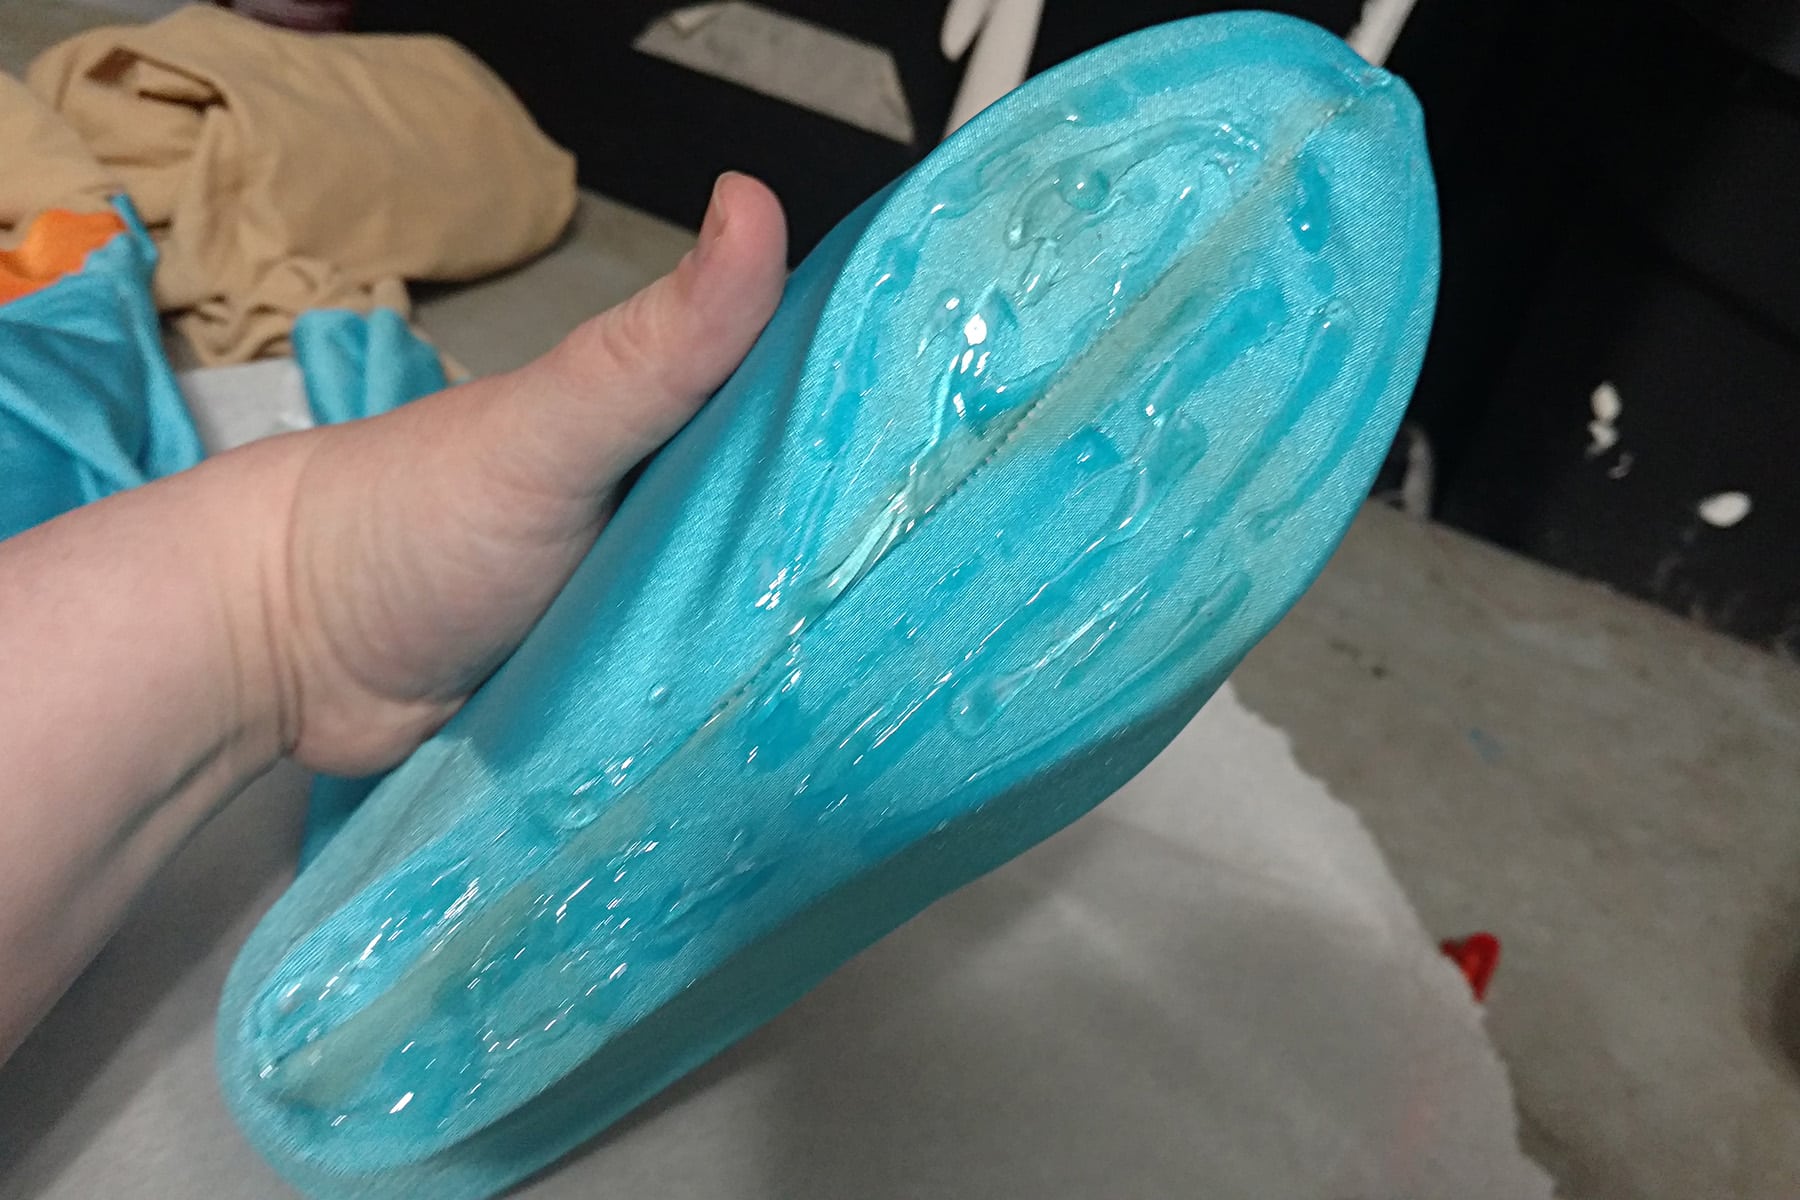 A hand displays the bottom of a blue fabric covered shoe. The bottom is covered in a thick, clear glue.